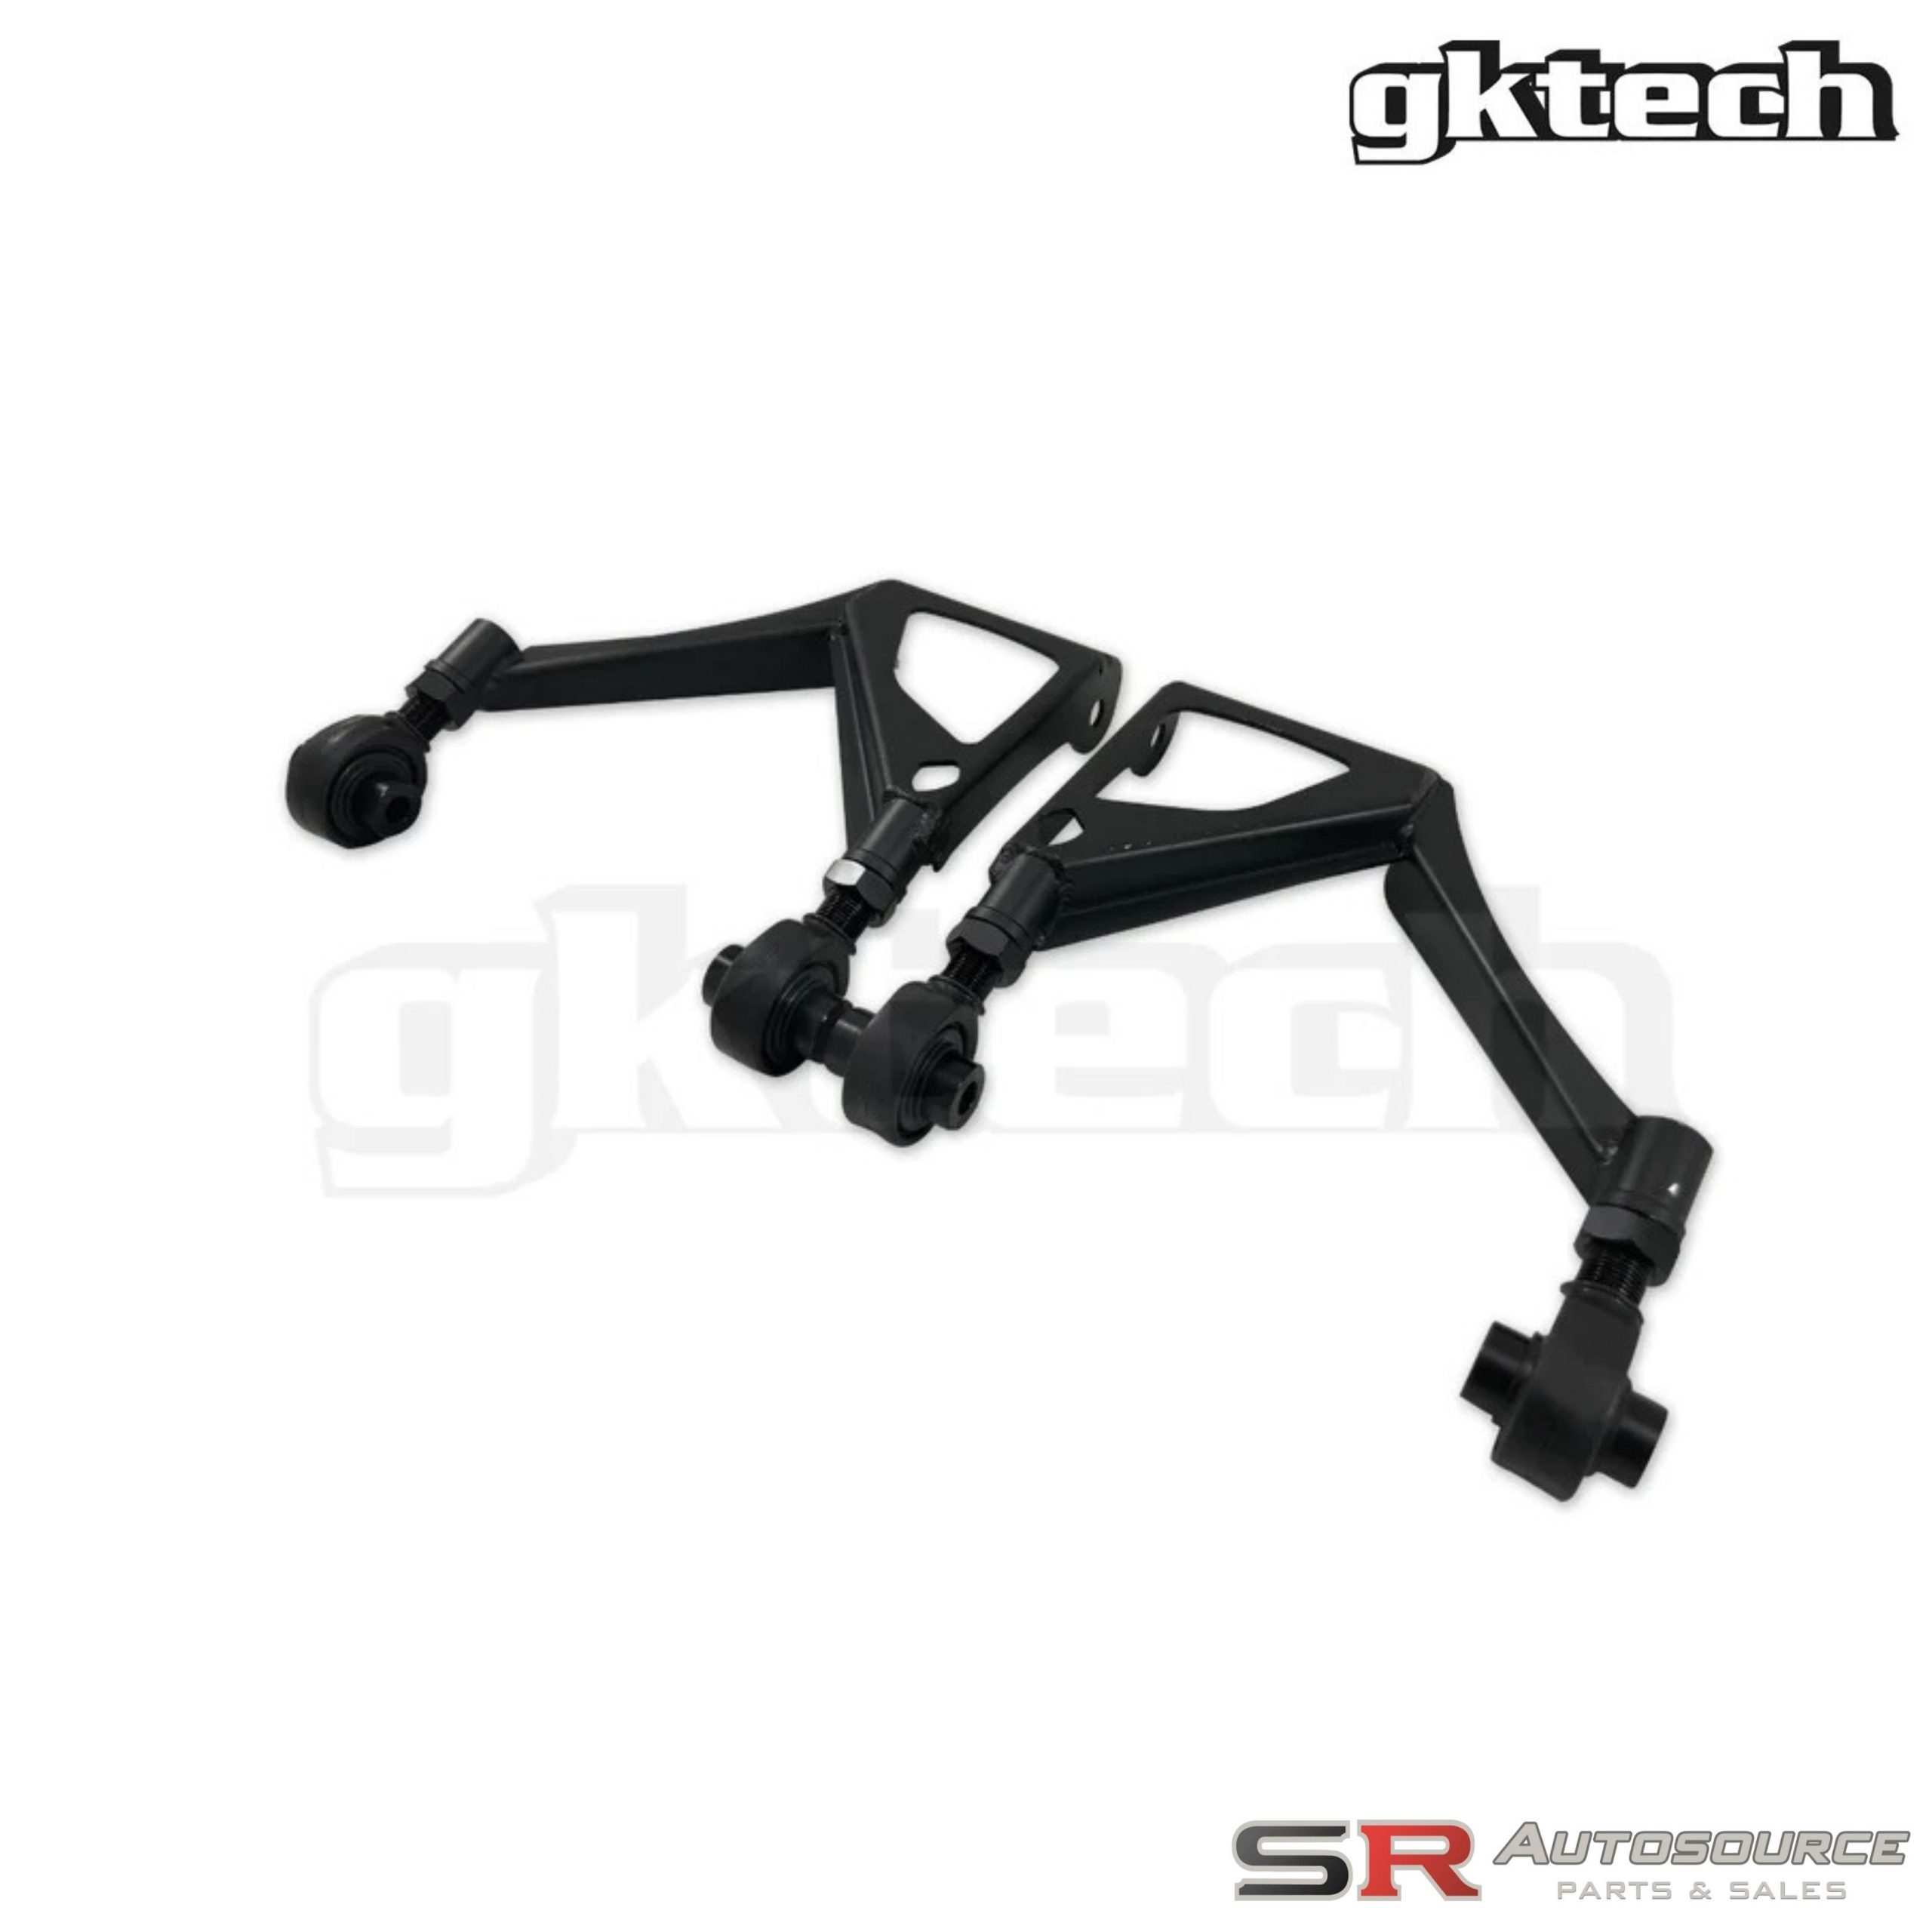 GK Tech R33/R34 Front Upper Control Arms